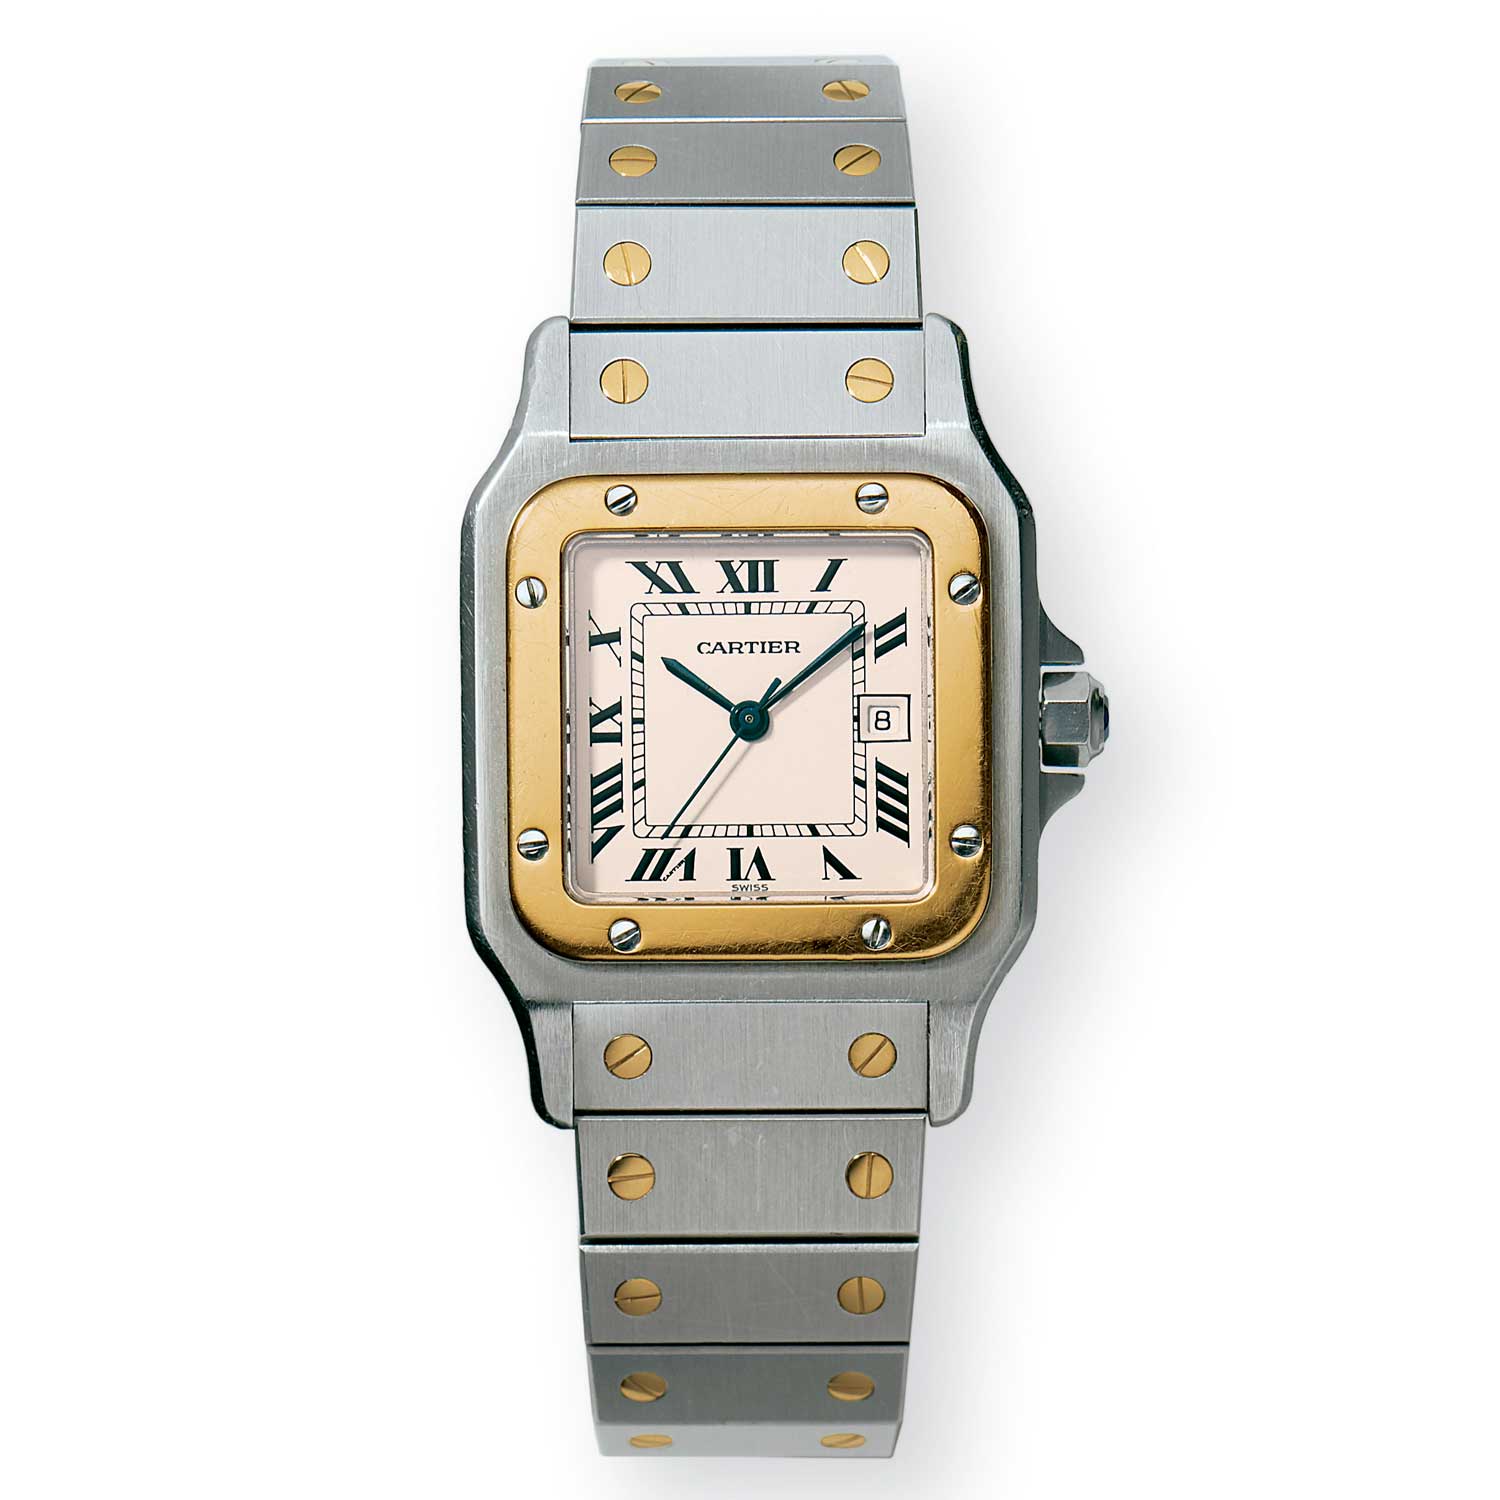 In 1978, Santos de Cartier made a reappearance, now with a sporty new look in gold and steel